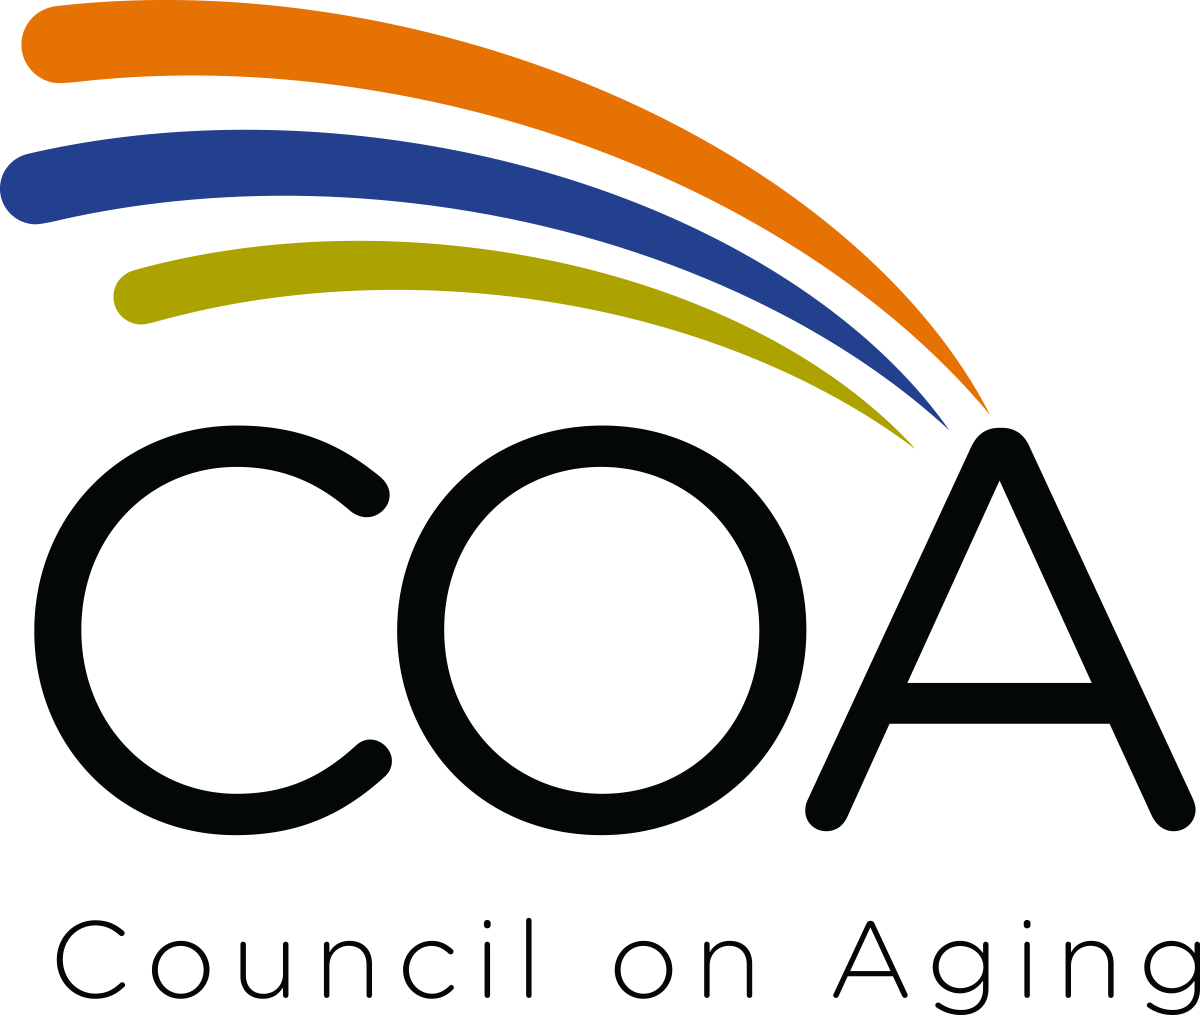 Council on Aging